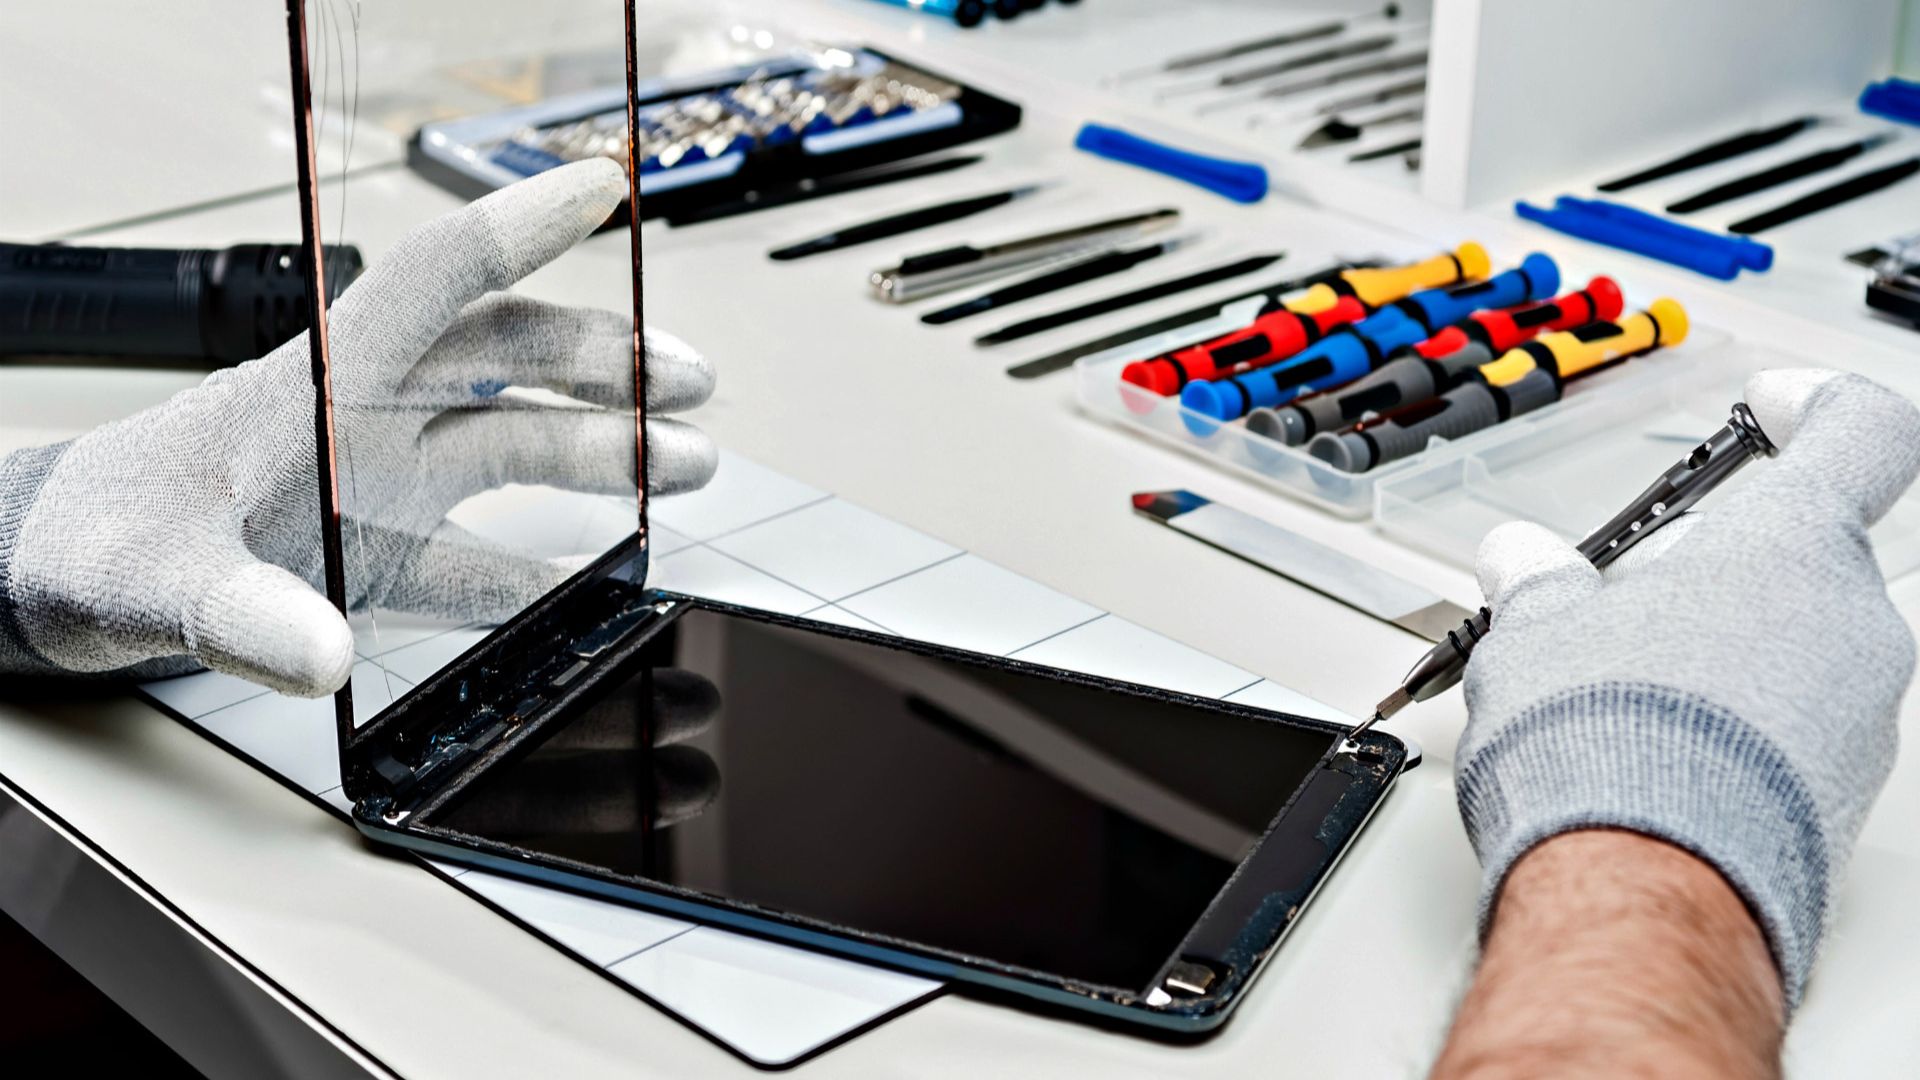 Essential Cell Phone Repair Tools You Need For DIY